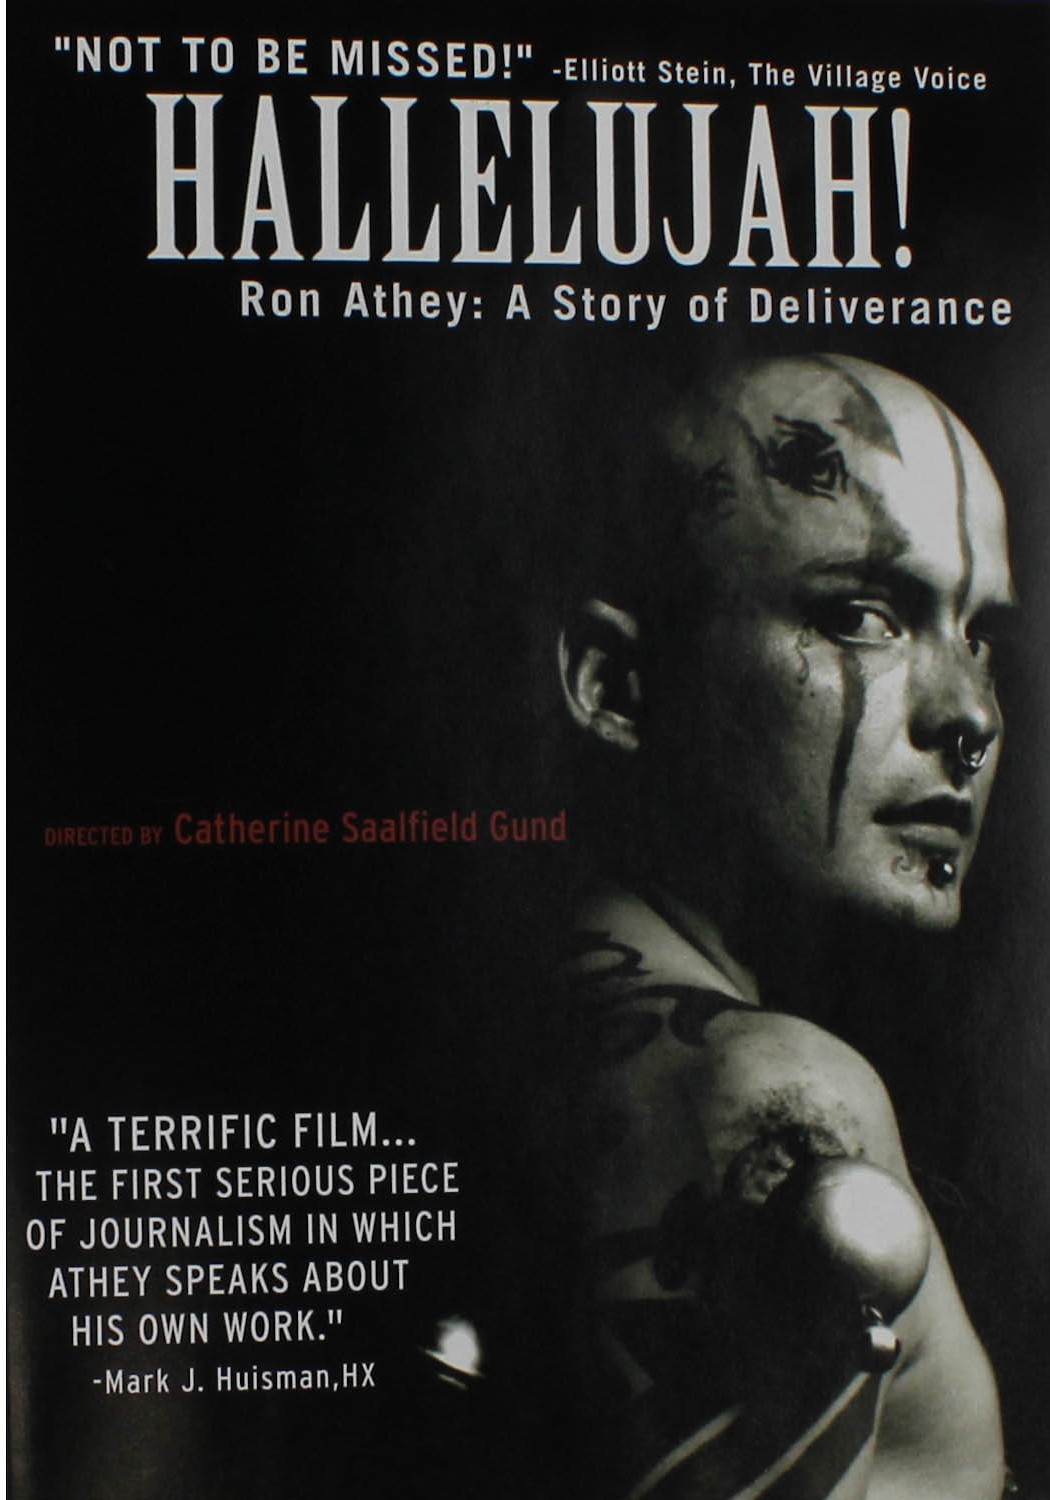 Hallelujah! Ron Athey: A Story of Deliverance (1998) Screenshot 1 